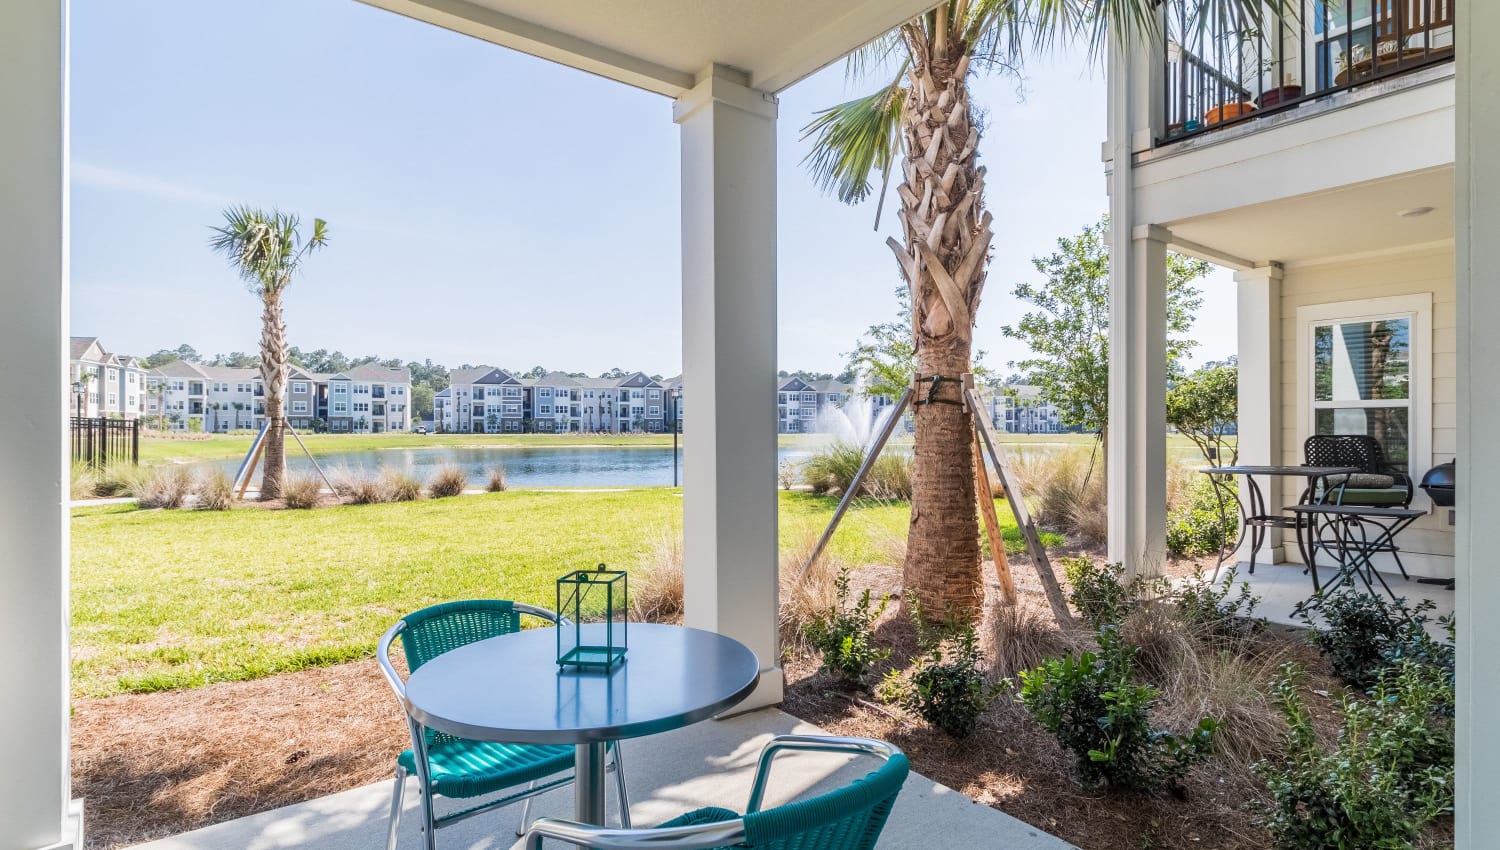 Private patio at The Carlton at Bartram Park in Jacksonville, Florida